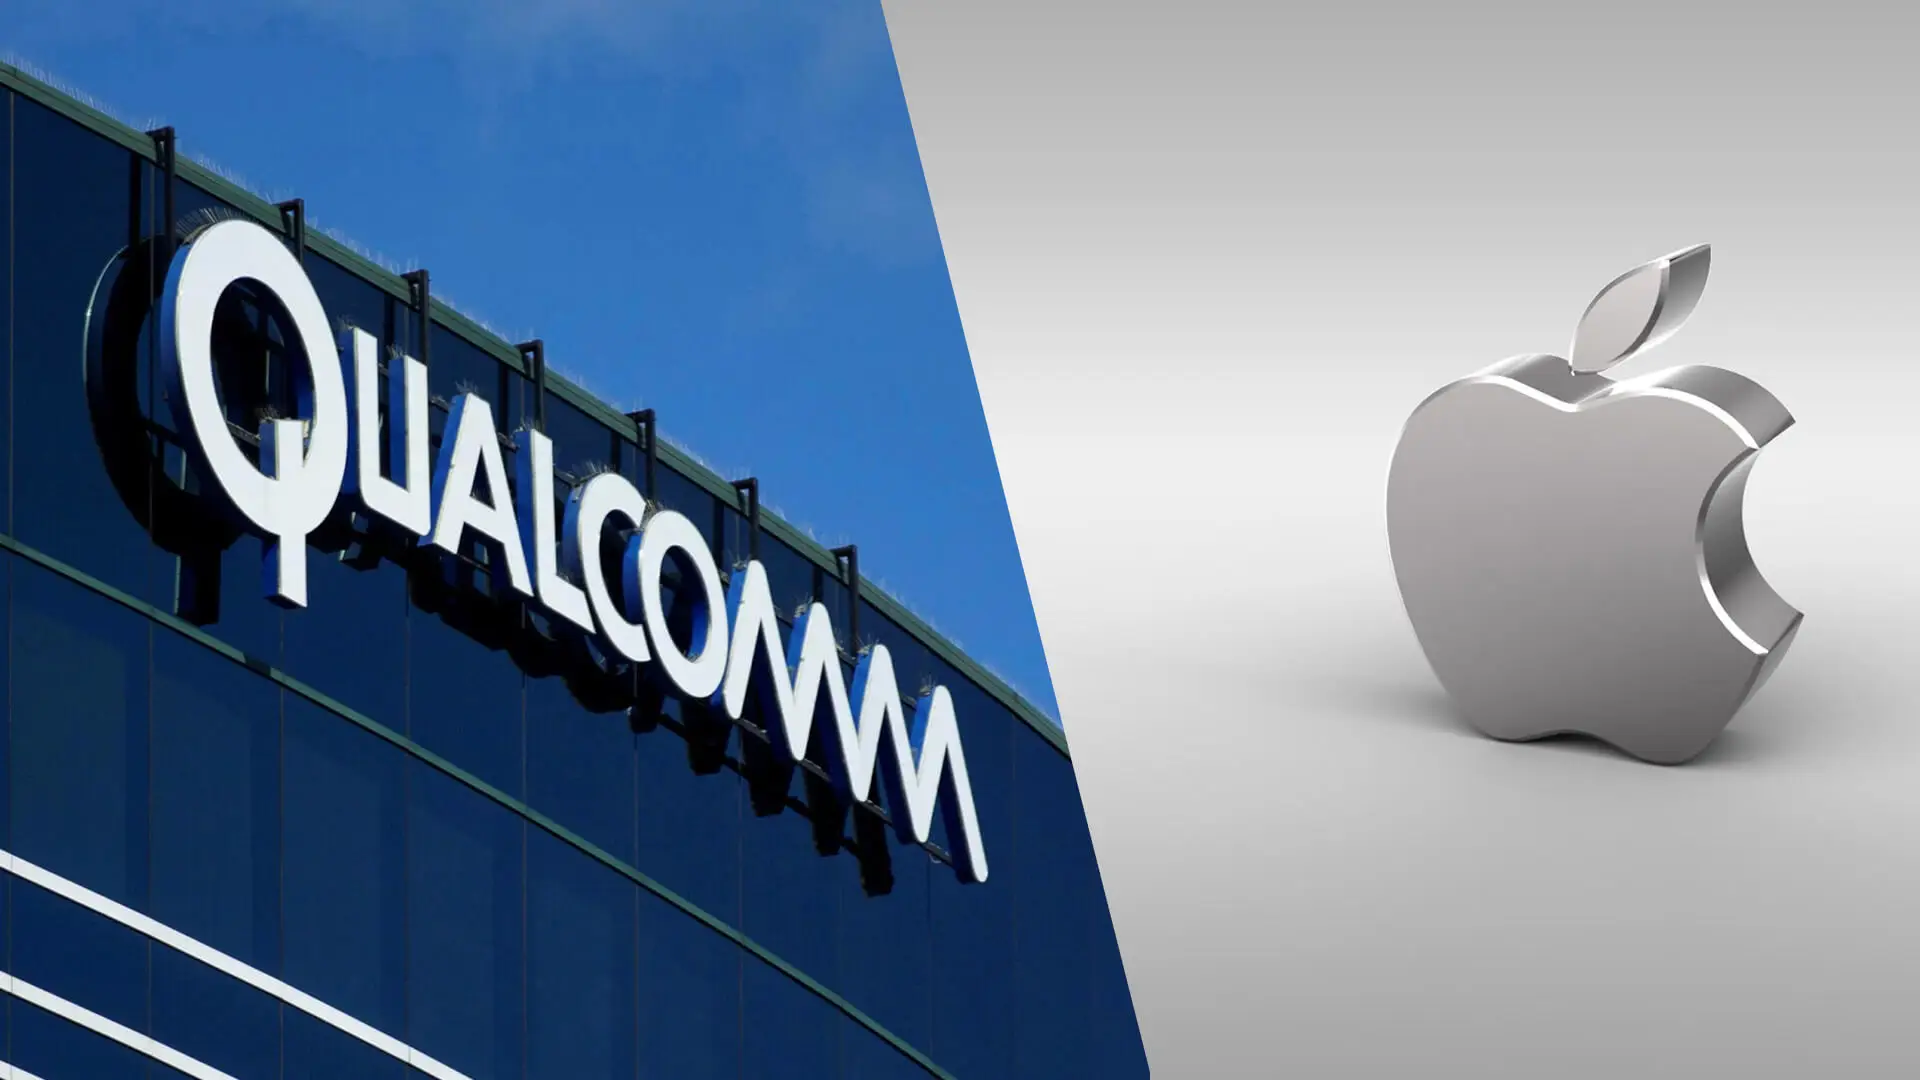 Qualcomm-Apple Battle Heats Up as Former Urges Ban on iPhone Imports